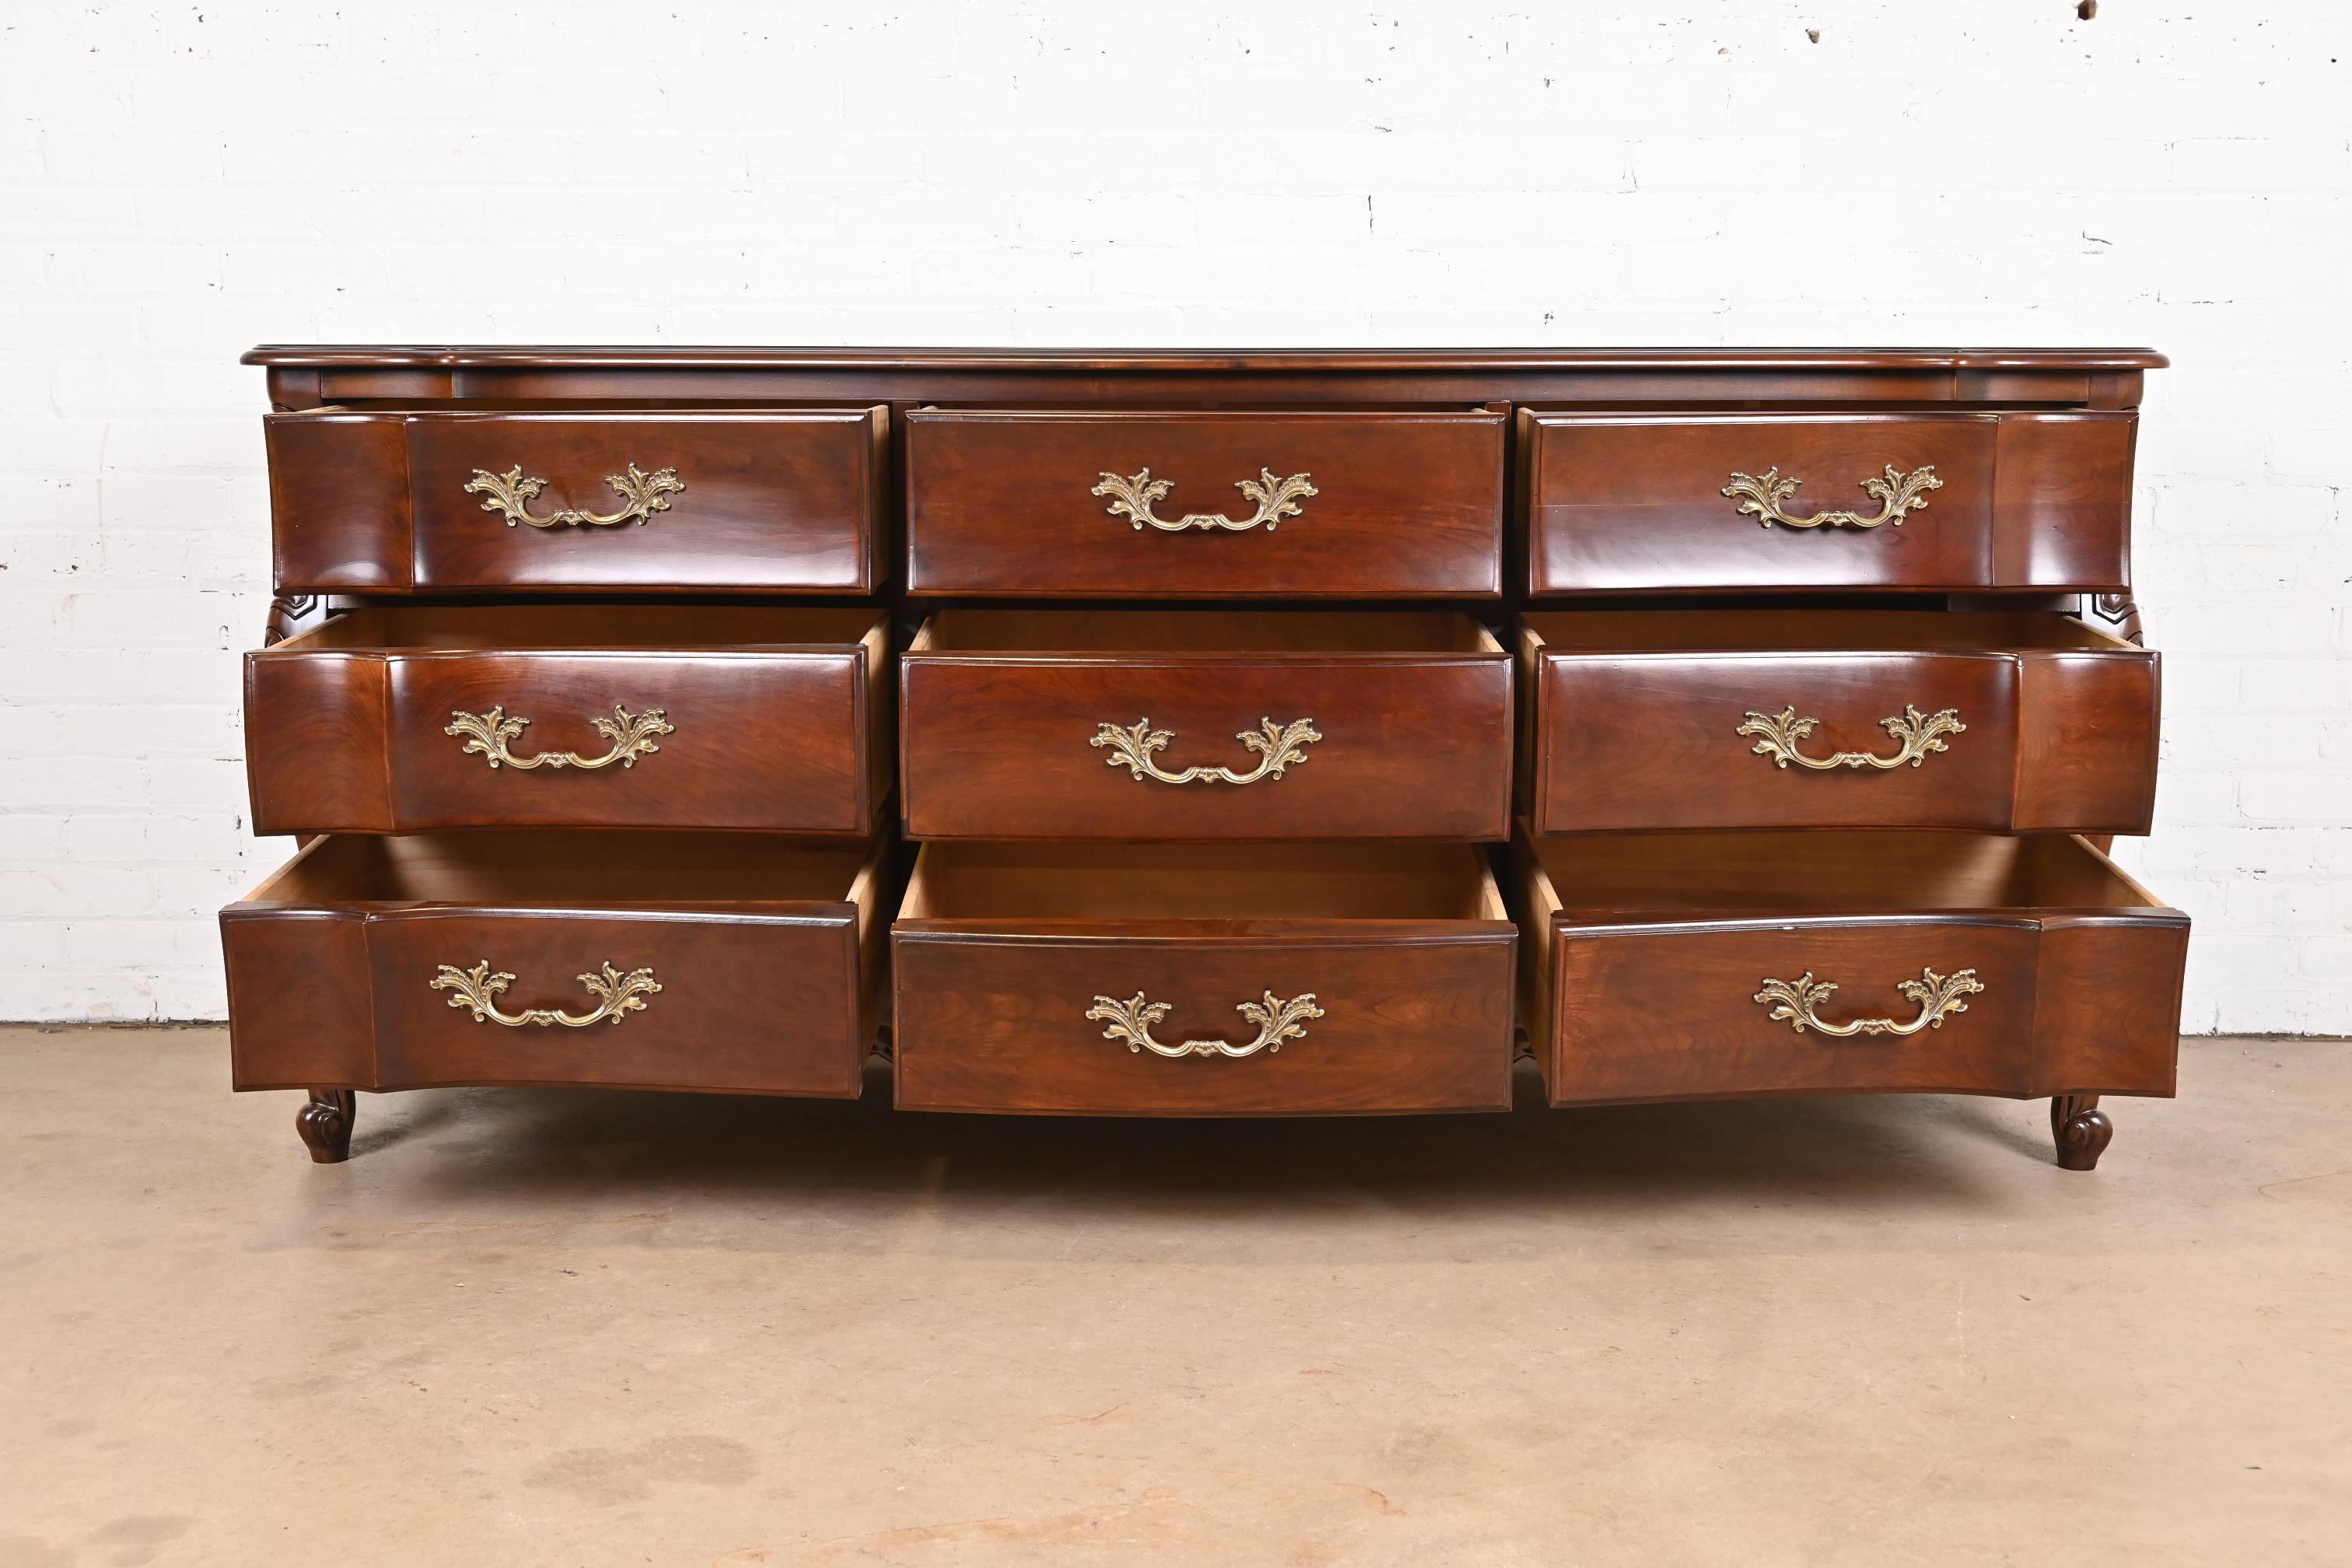 20th Century French Provincial Louis XV Cherry Wood Dresser by White Furniture, Refinished For Sale